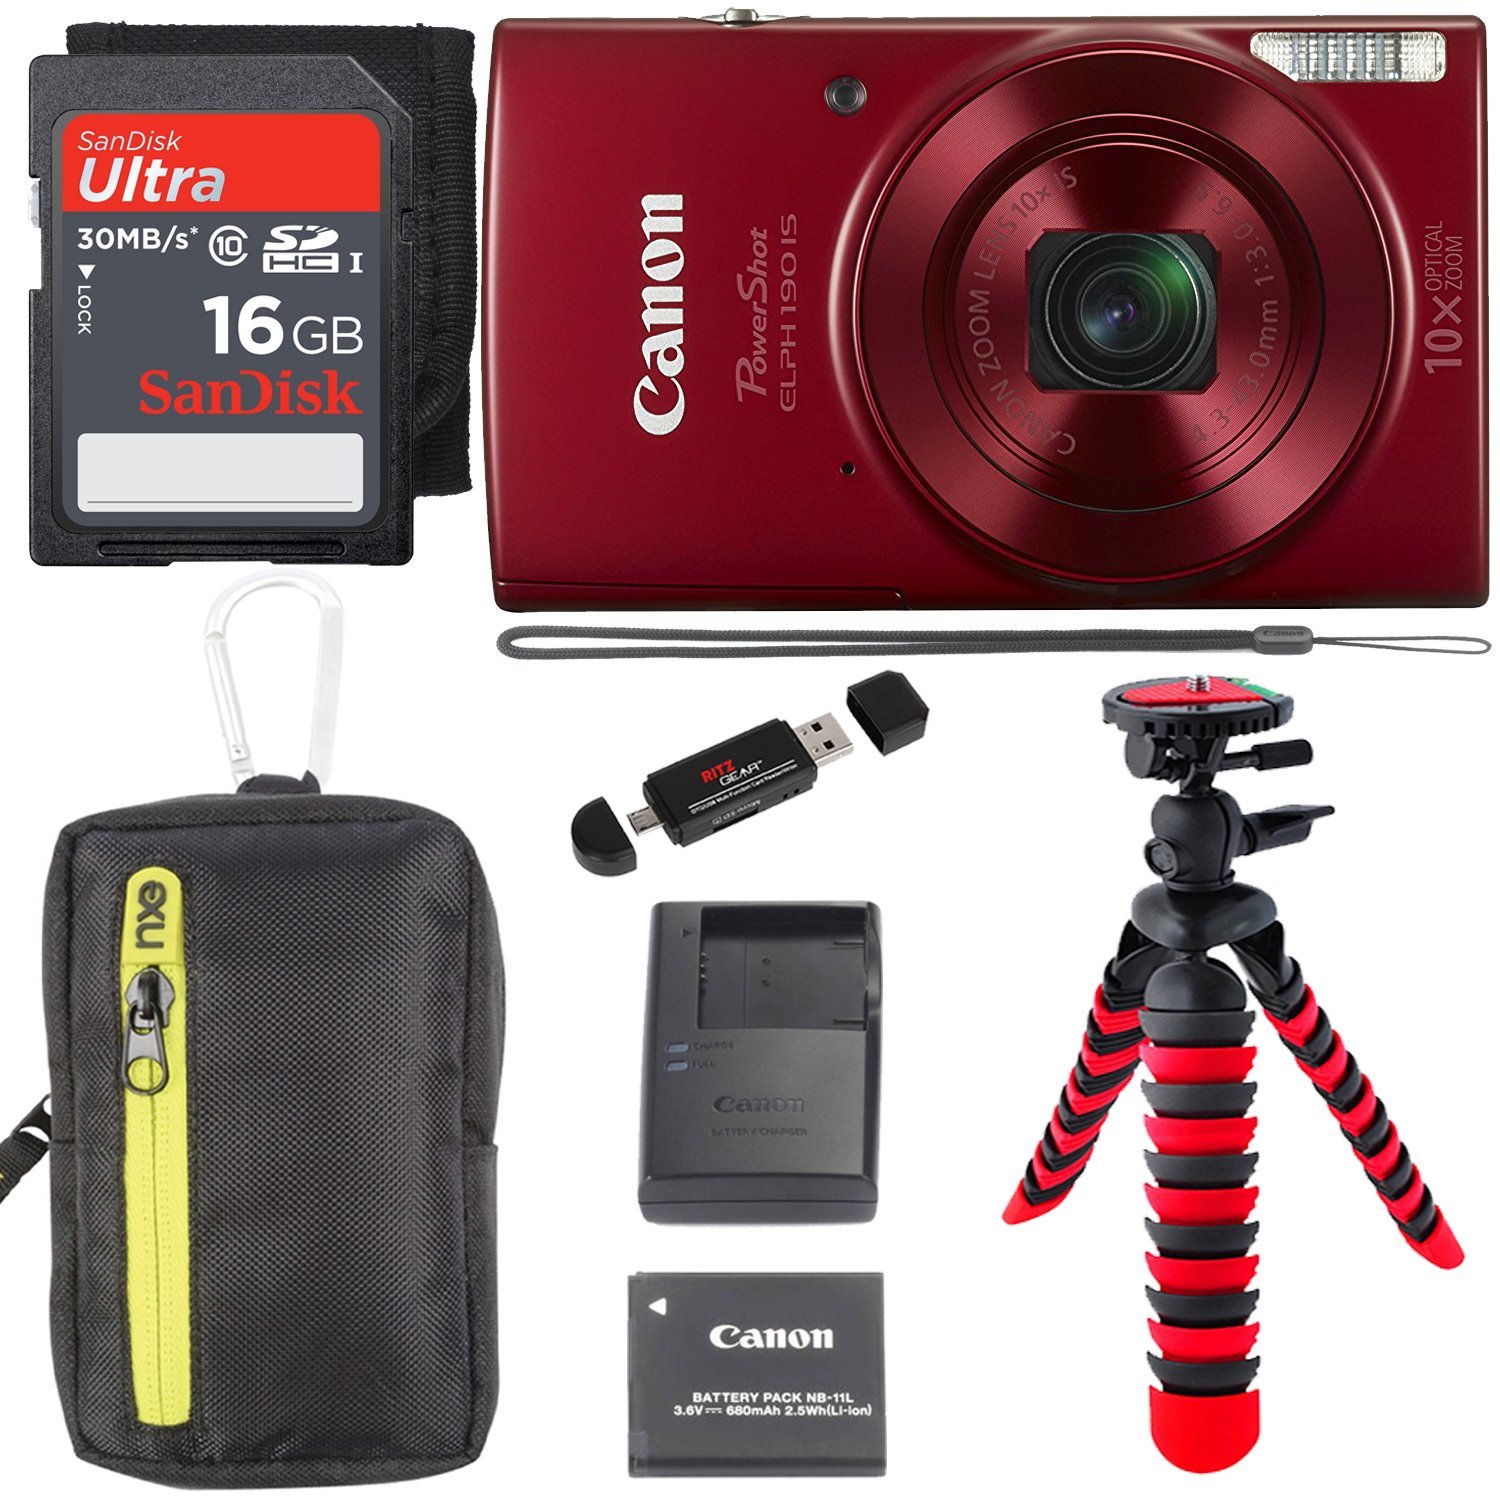 CANON POWERSHOT ELPH190 DIGITAL CAMERA 10x OPTICAL ZOOM IS WI-FI NFC ENABLED (RED) SANDISK ULTRA 16GB CAMERA CASE AND PREMIUM ACCESORY BUNDLE